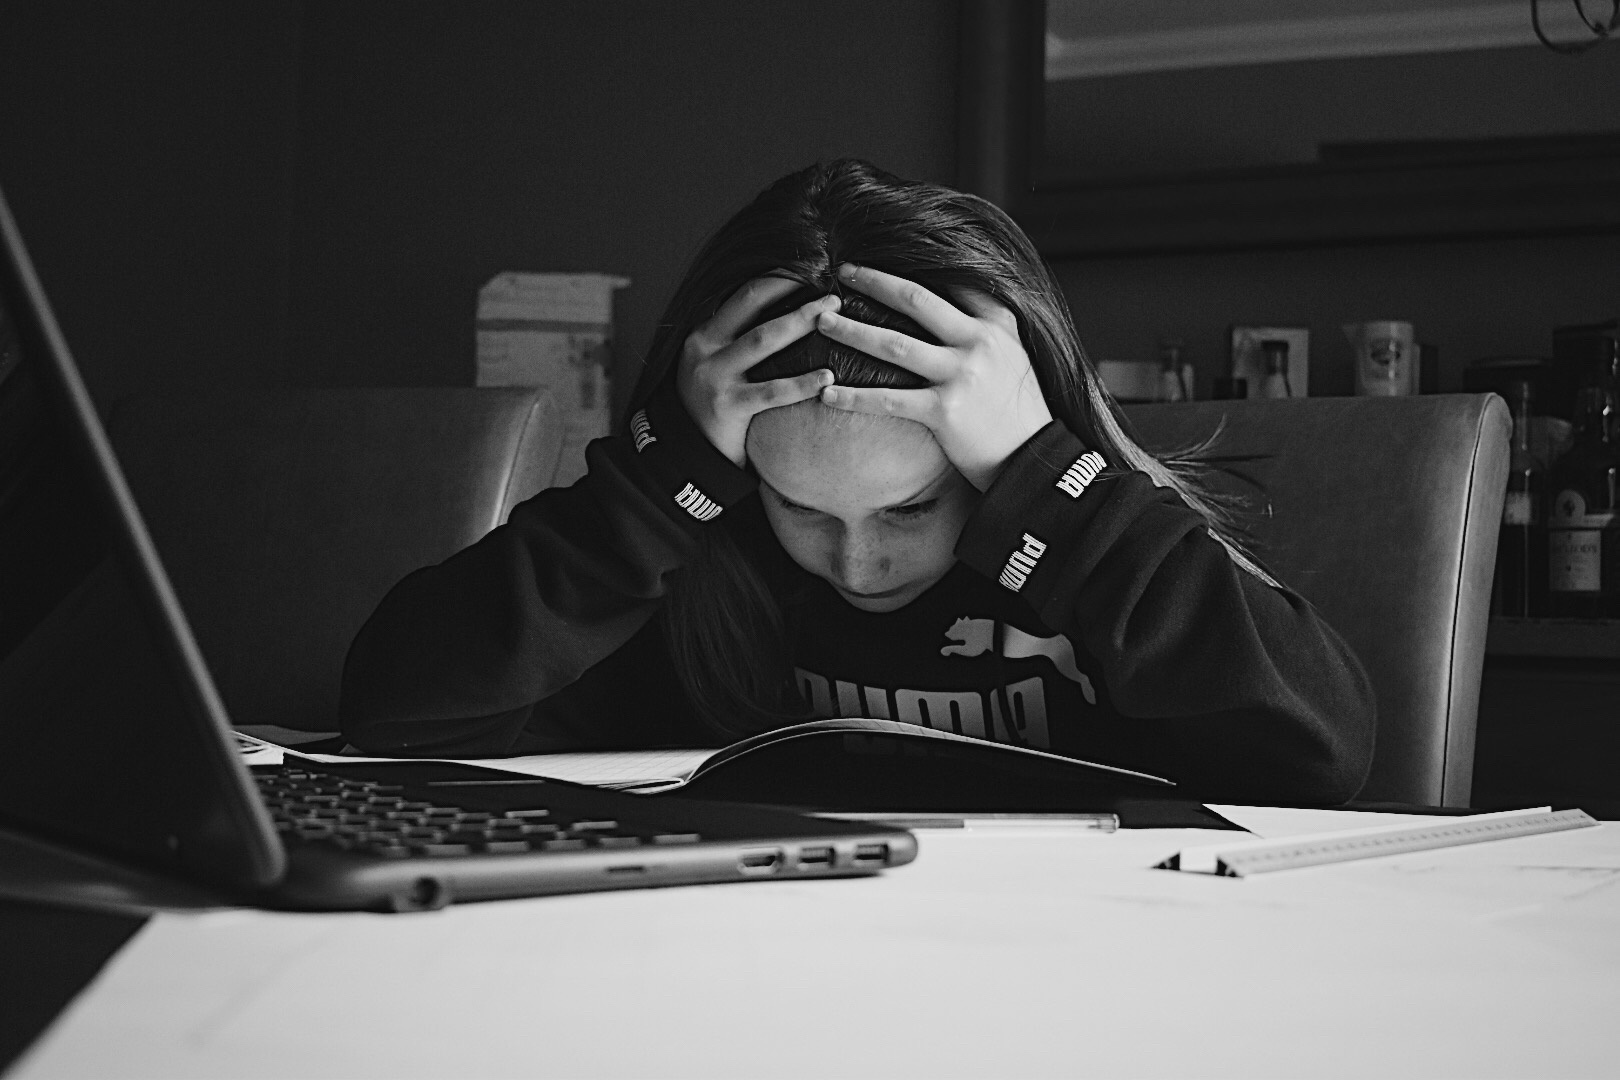 Black and white photograph of girl looking stressed